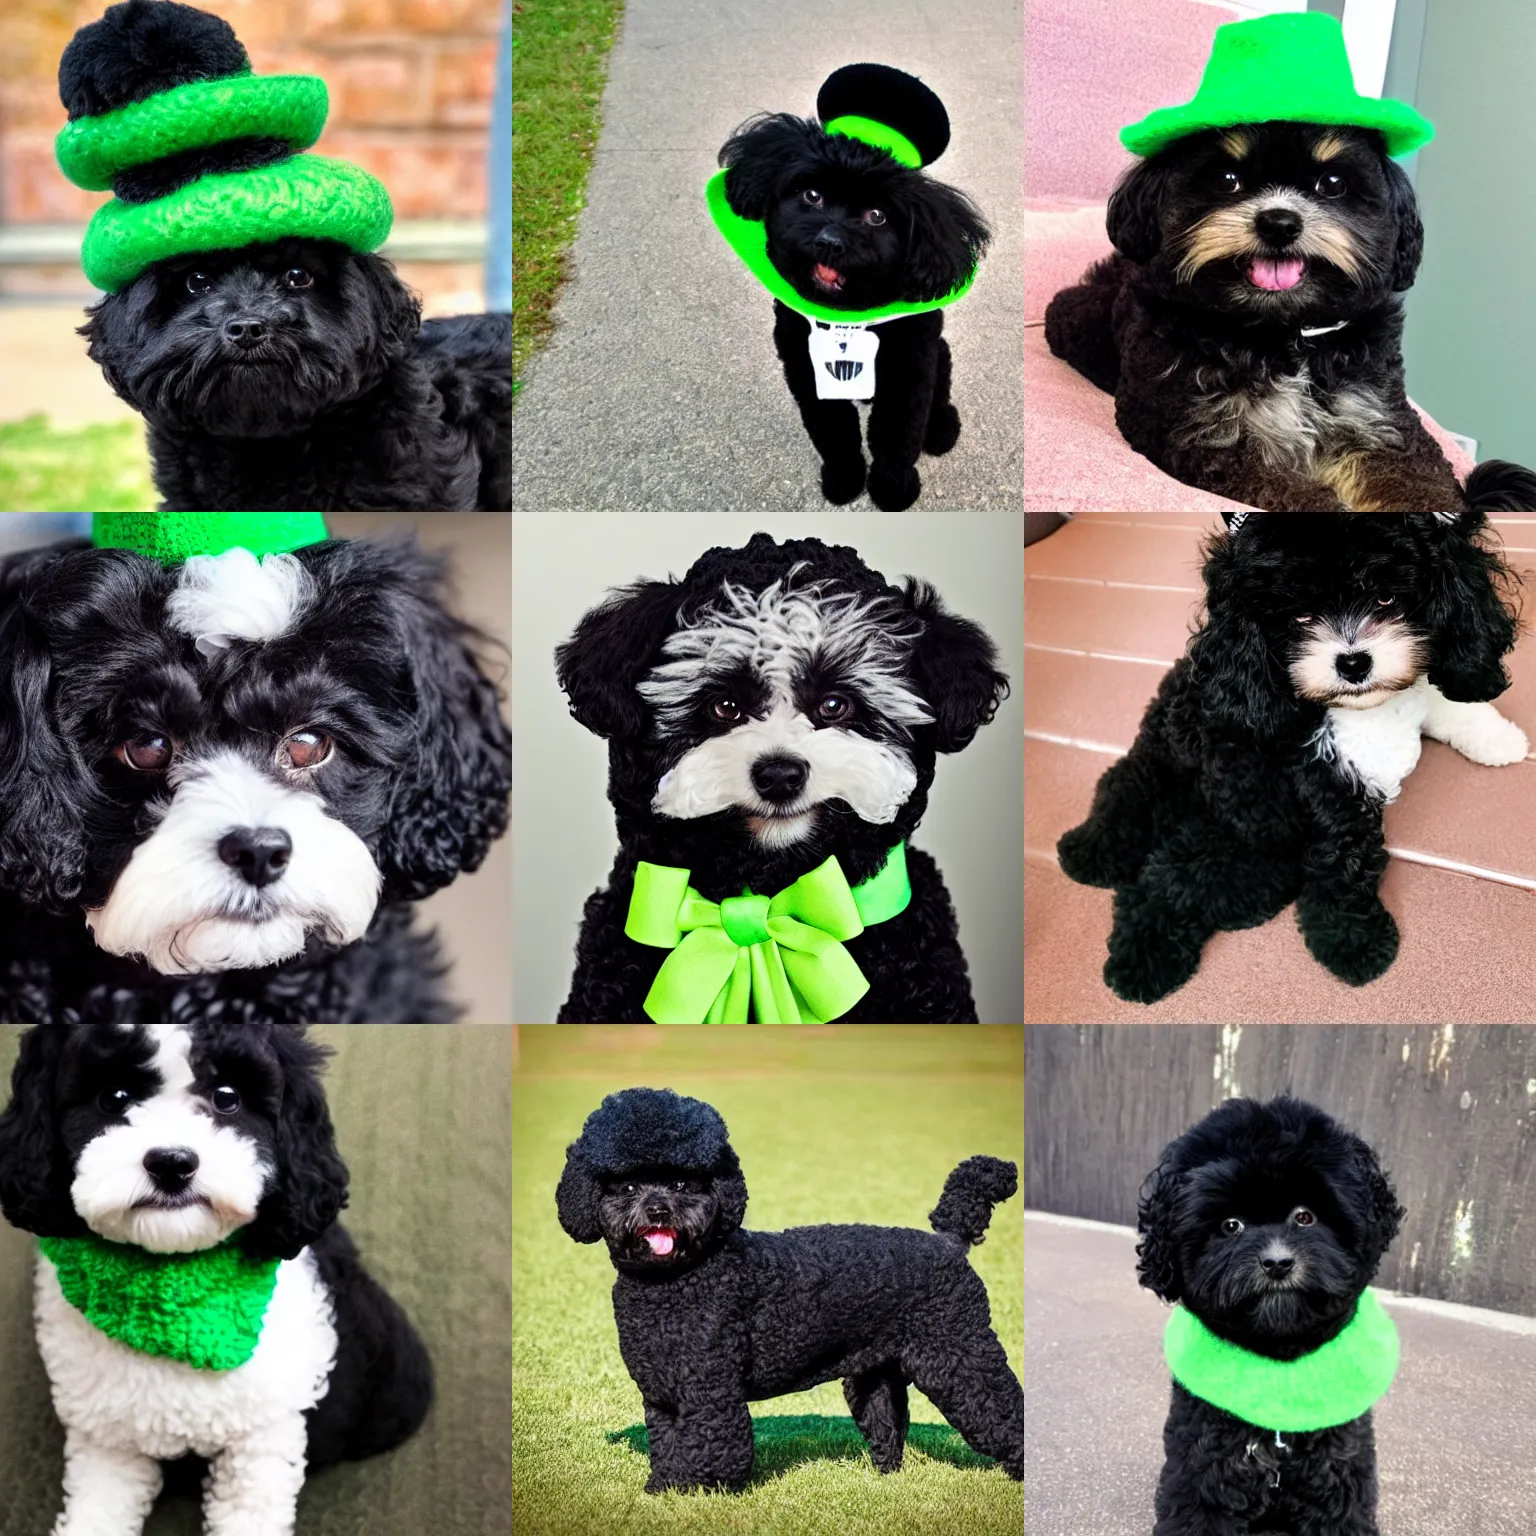 Prompt: A black shihpoo with a green hat